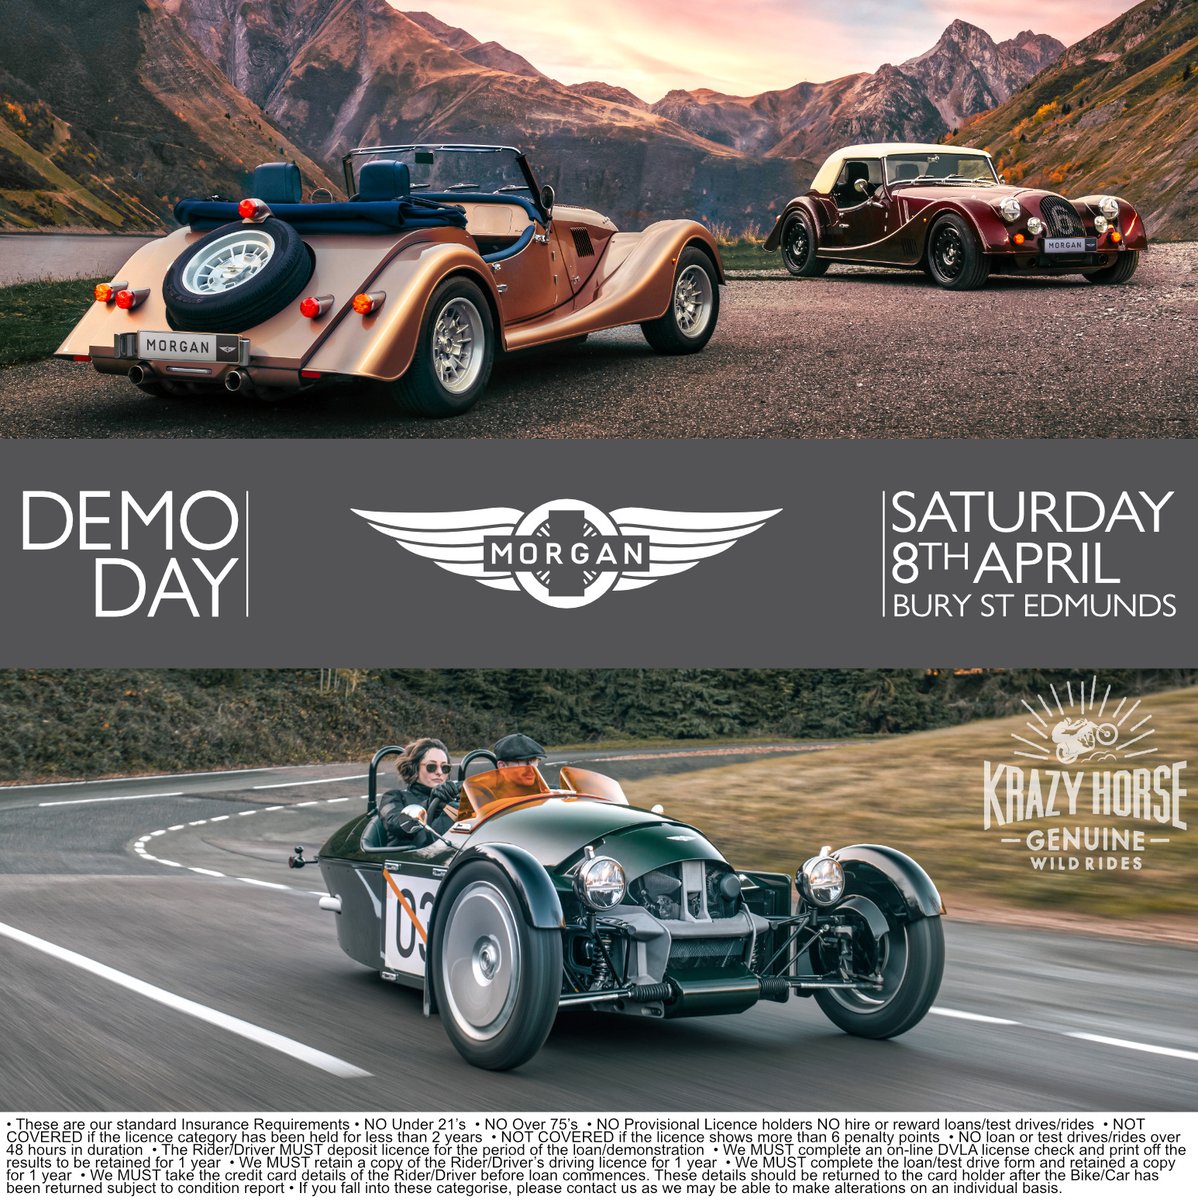 We postponed the demo day to this weekend (8th April 2023) due to the weather last week and there are a few slots left! Email info@krazyhorse.co.uk to book! 
#krazyhorse #morganmotorcompany #plusline #plussix #plusfour #super3